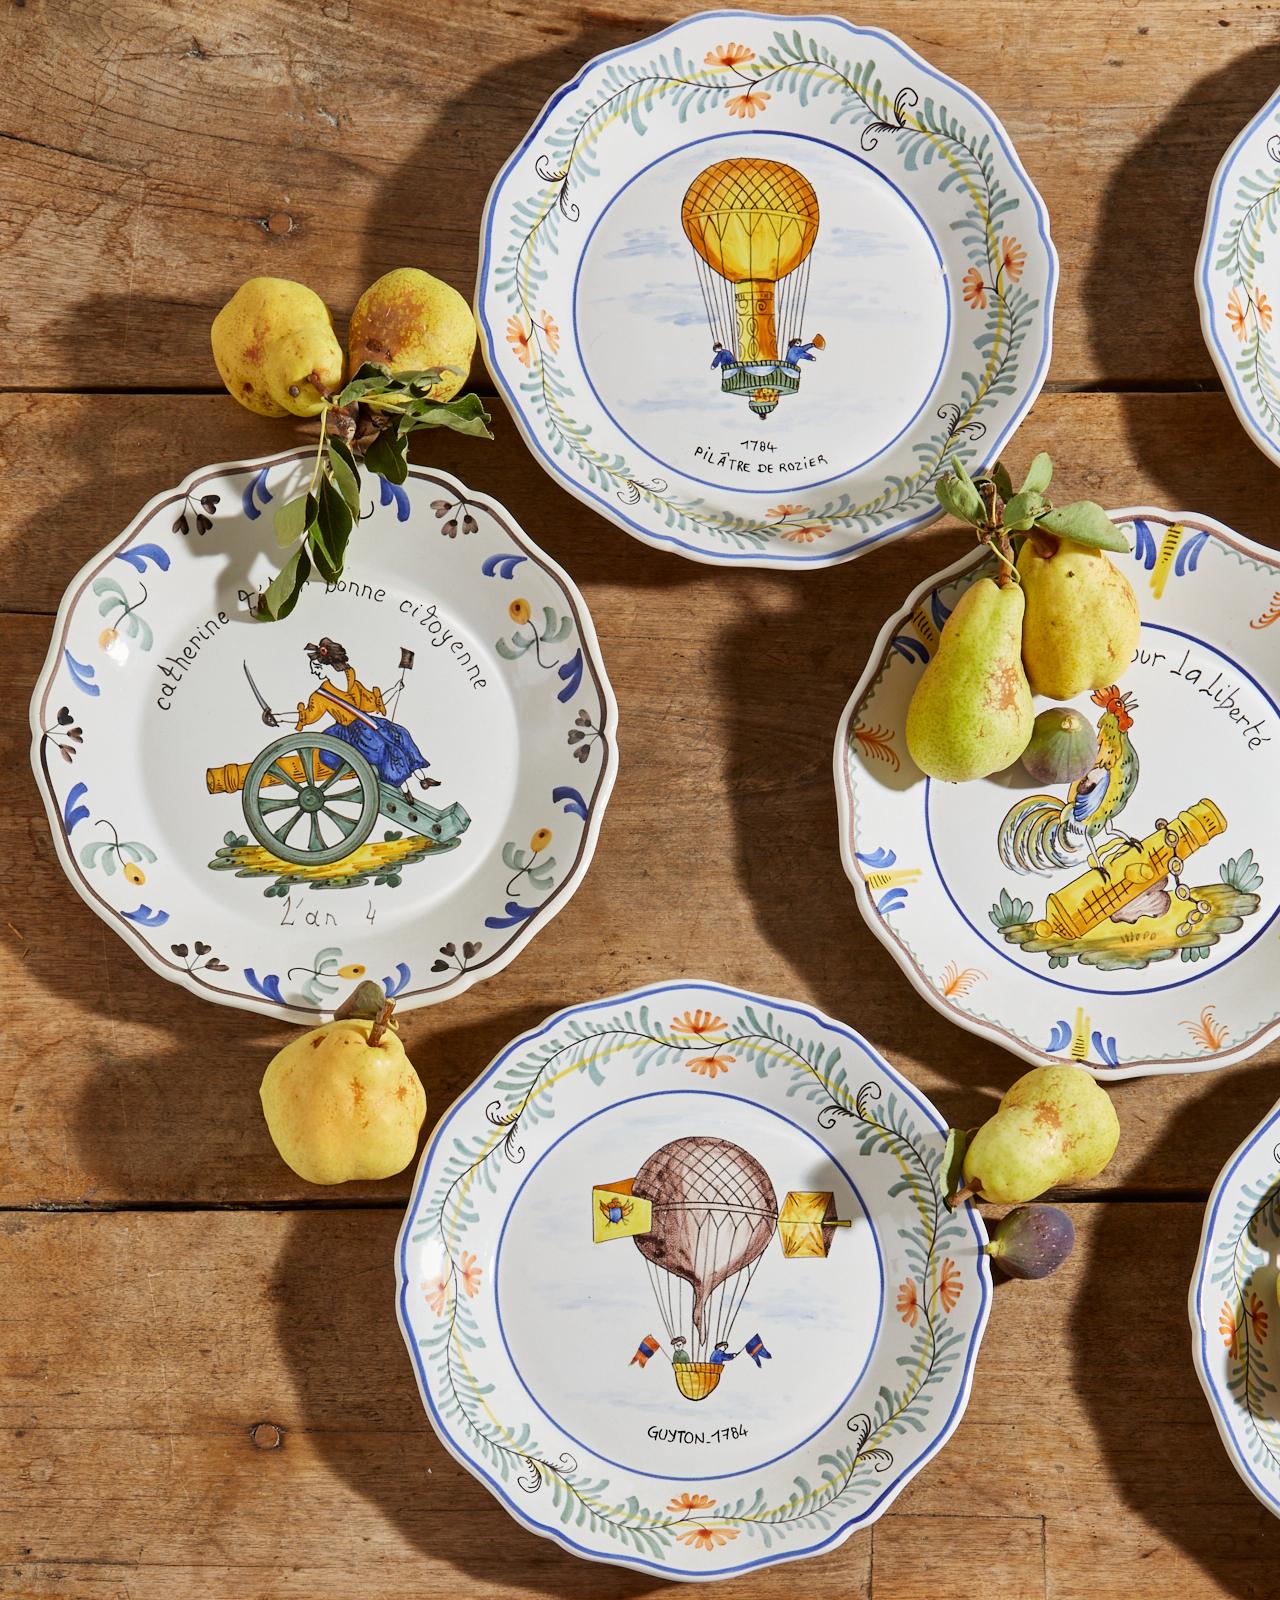 Charming set of nine French Provincial style Faience dinner plates. Each hand painted with scenes of balloons, figures, and a rooster. Dated with 18th century dates on front and motifs. Labeled on backs made in France.